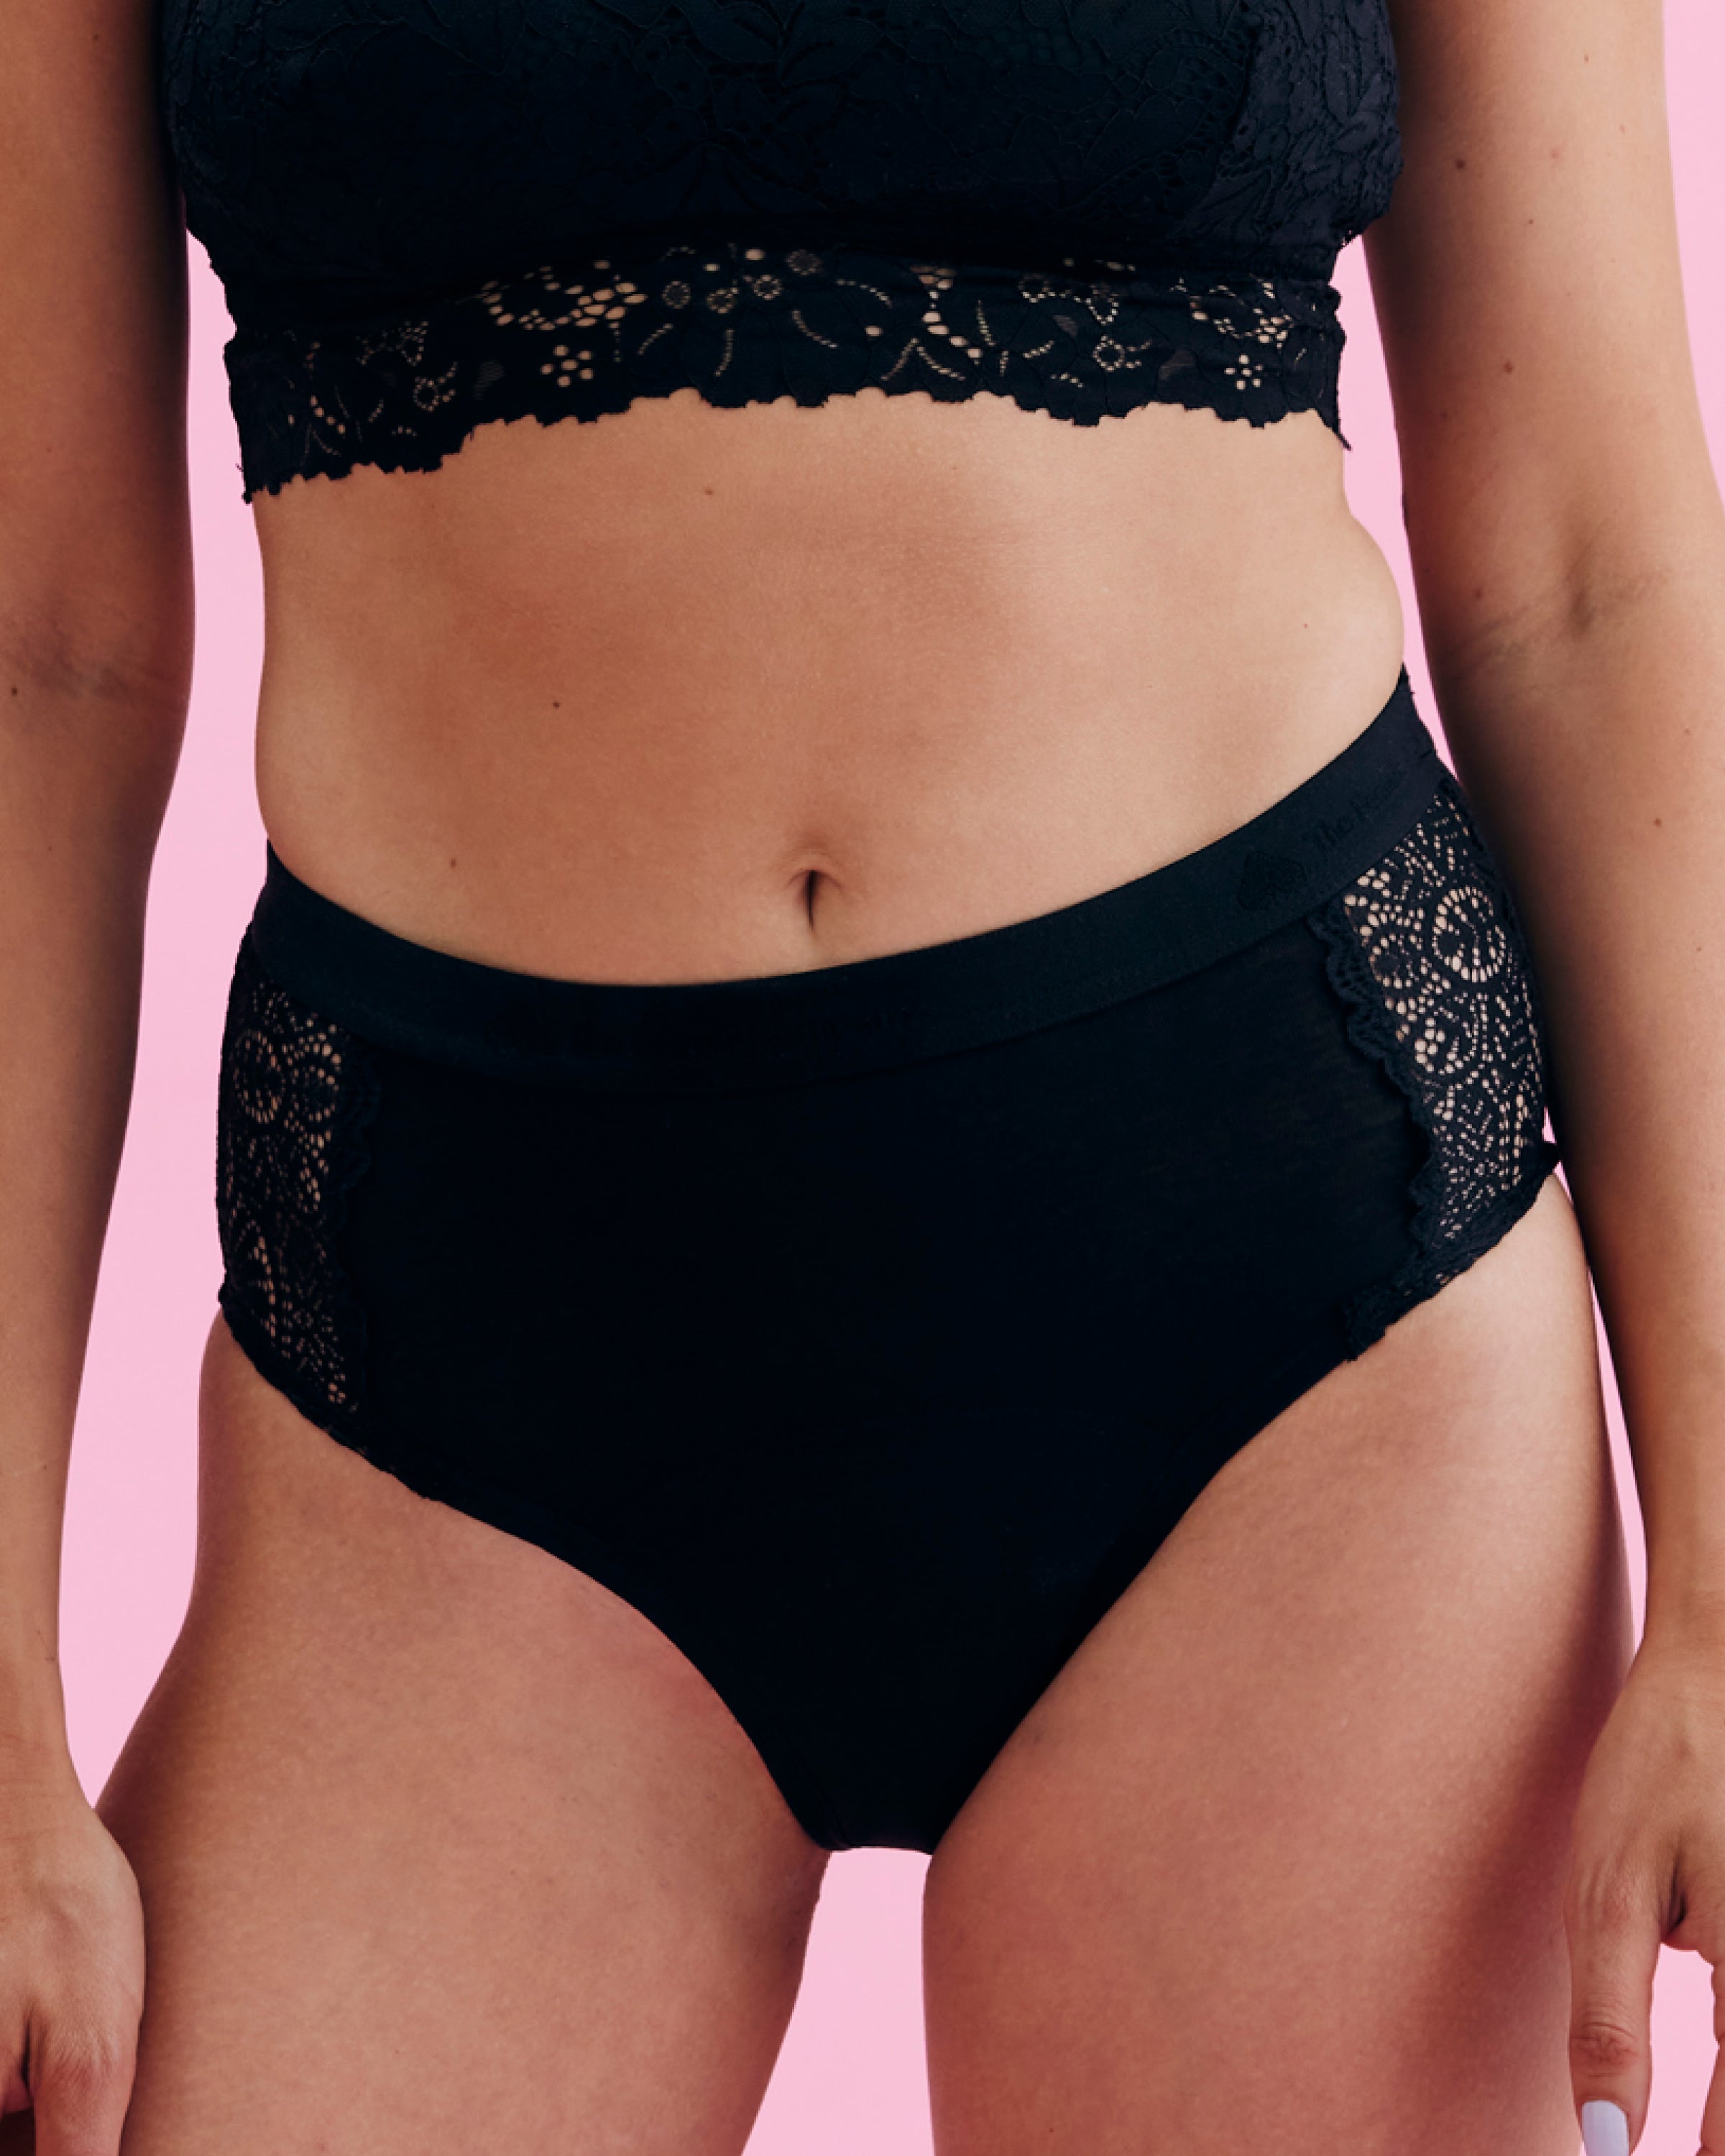 Period Panty High Waist with lace shop online